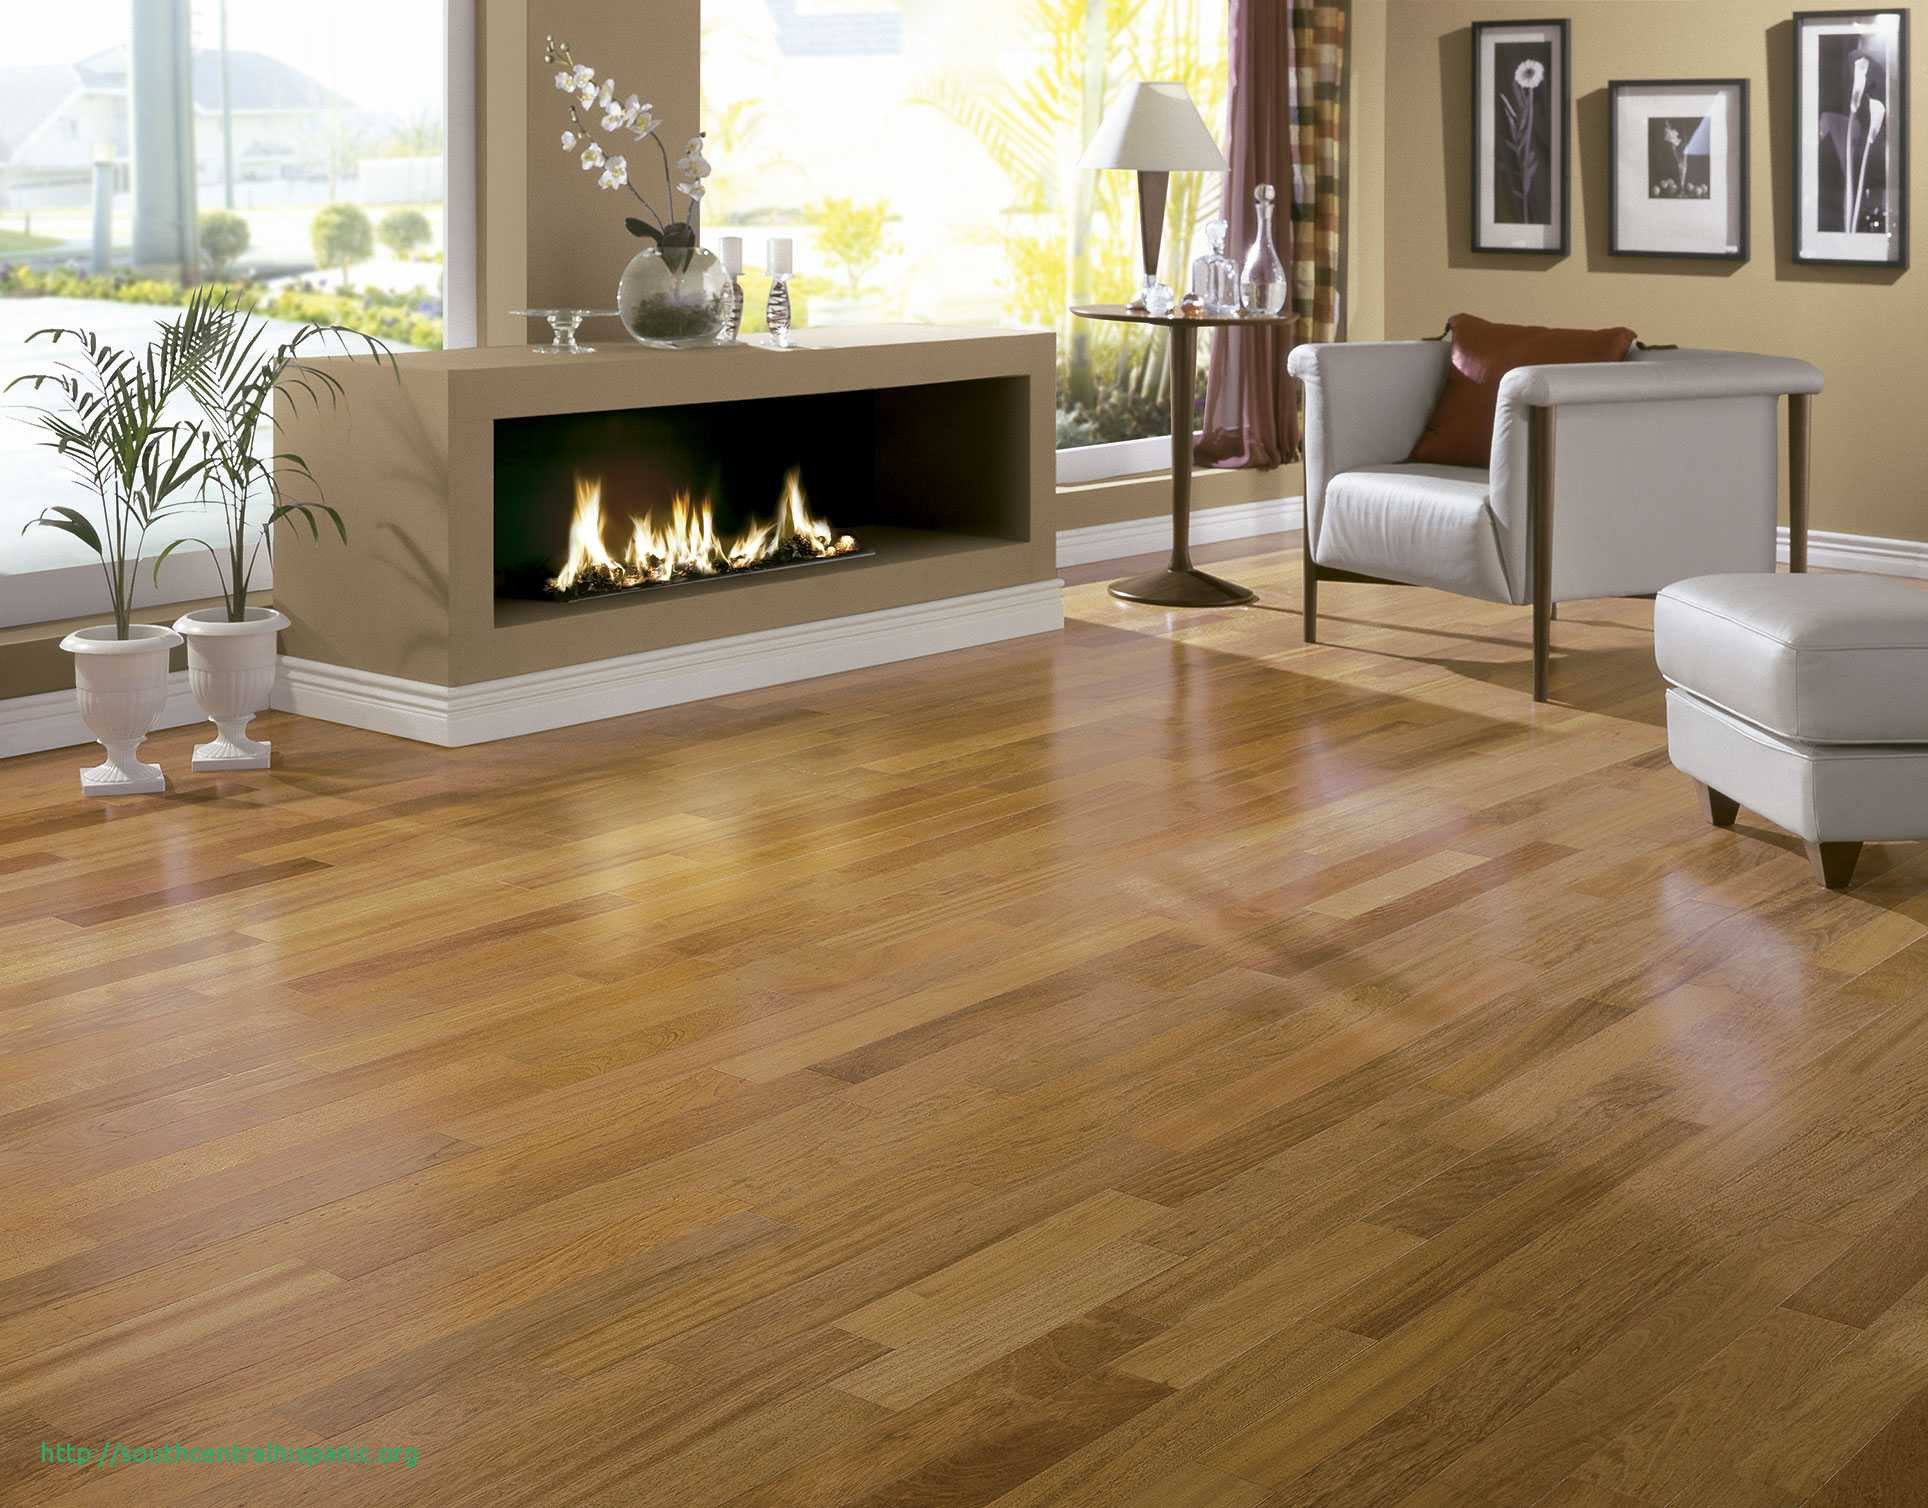 Fireplace Warehouse Denver Inspirational 25 Popular How Much Does Laminate Hardwood Flooring Cost